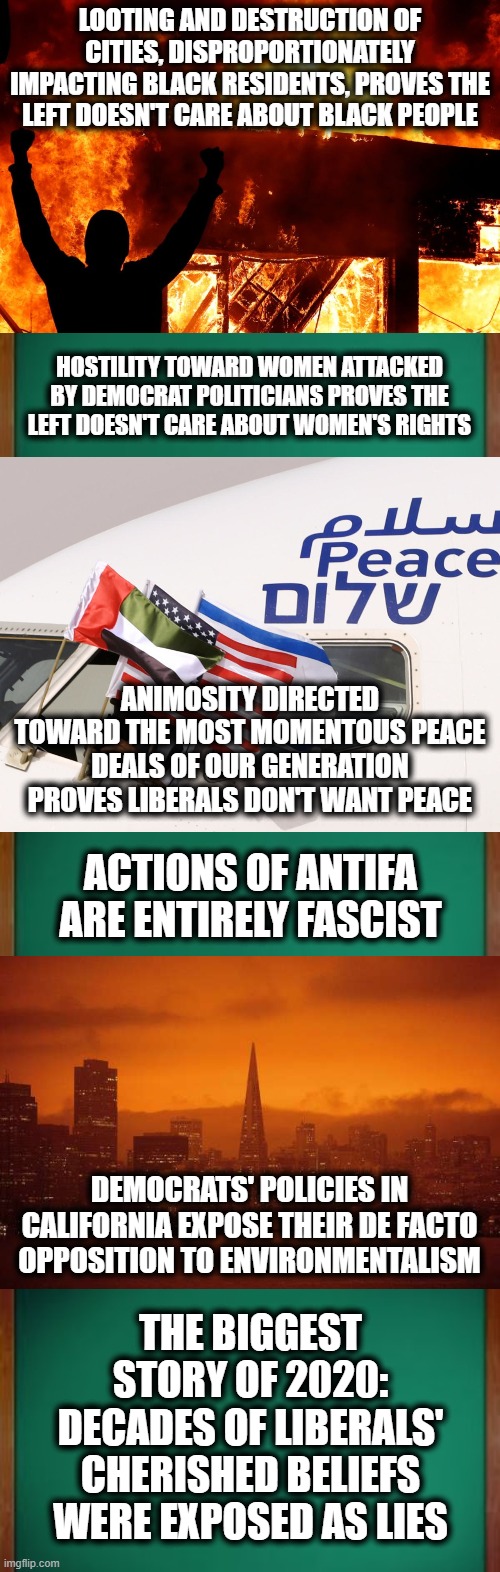 LOOTING AND DESTRUCTION OF CITIES, DISPROPORTIONATELY IMPACTING BLACK RESIDENTS, PROVES THE LEFT DOESN'T CARE ABOUT BLACK PEOPLE; HOSTILITY TOWARD WOMEN ATTACKED BY DEMOCRAT POLITICIANS PROVES THE LEFT DOESN'T CARE ABOUT WOMEN'S RIGHTS; ANIMOSITY DIRECTED TOWARD THE MOST MOMENTOUS PEACE DEALS OF OUR GENERATION PROVES LIBERALS DON'T WANT PEACE; ACTIONS OF ANTIFA ARE ENTIRELY FASCIST; DEMOCRATS' POLICIES IN CALIFORNIA EXPOSE THEIR DE FACTO OPPOSITION TO ENVIRONMENTALISM; THE BIGGEST STORY OF 2020: DECADES OF LIBERALS' CHERISHED BELIEFS WERE EXPOSED AS LIES | image tagged in memes,stupid liberals,blm,environment,women's rights,exposed as lies | made w/ Imgflip meme maker